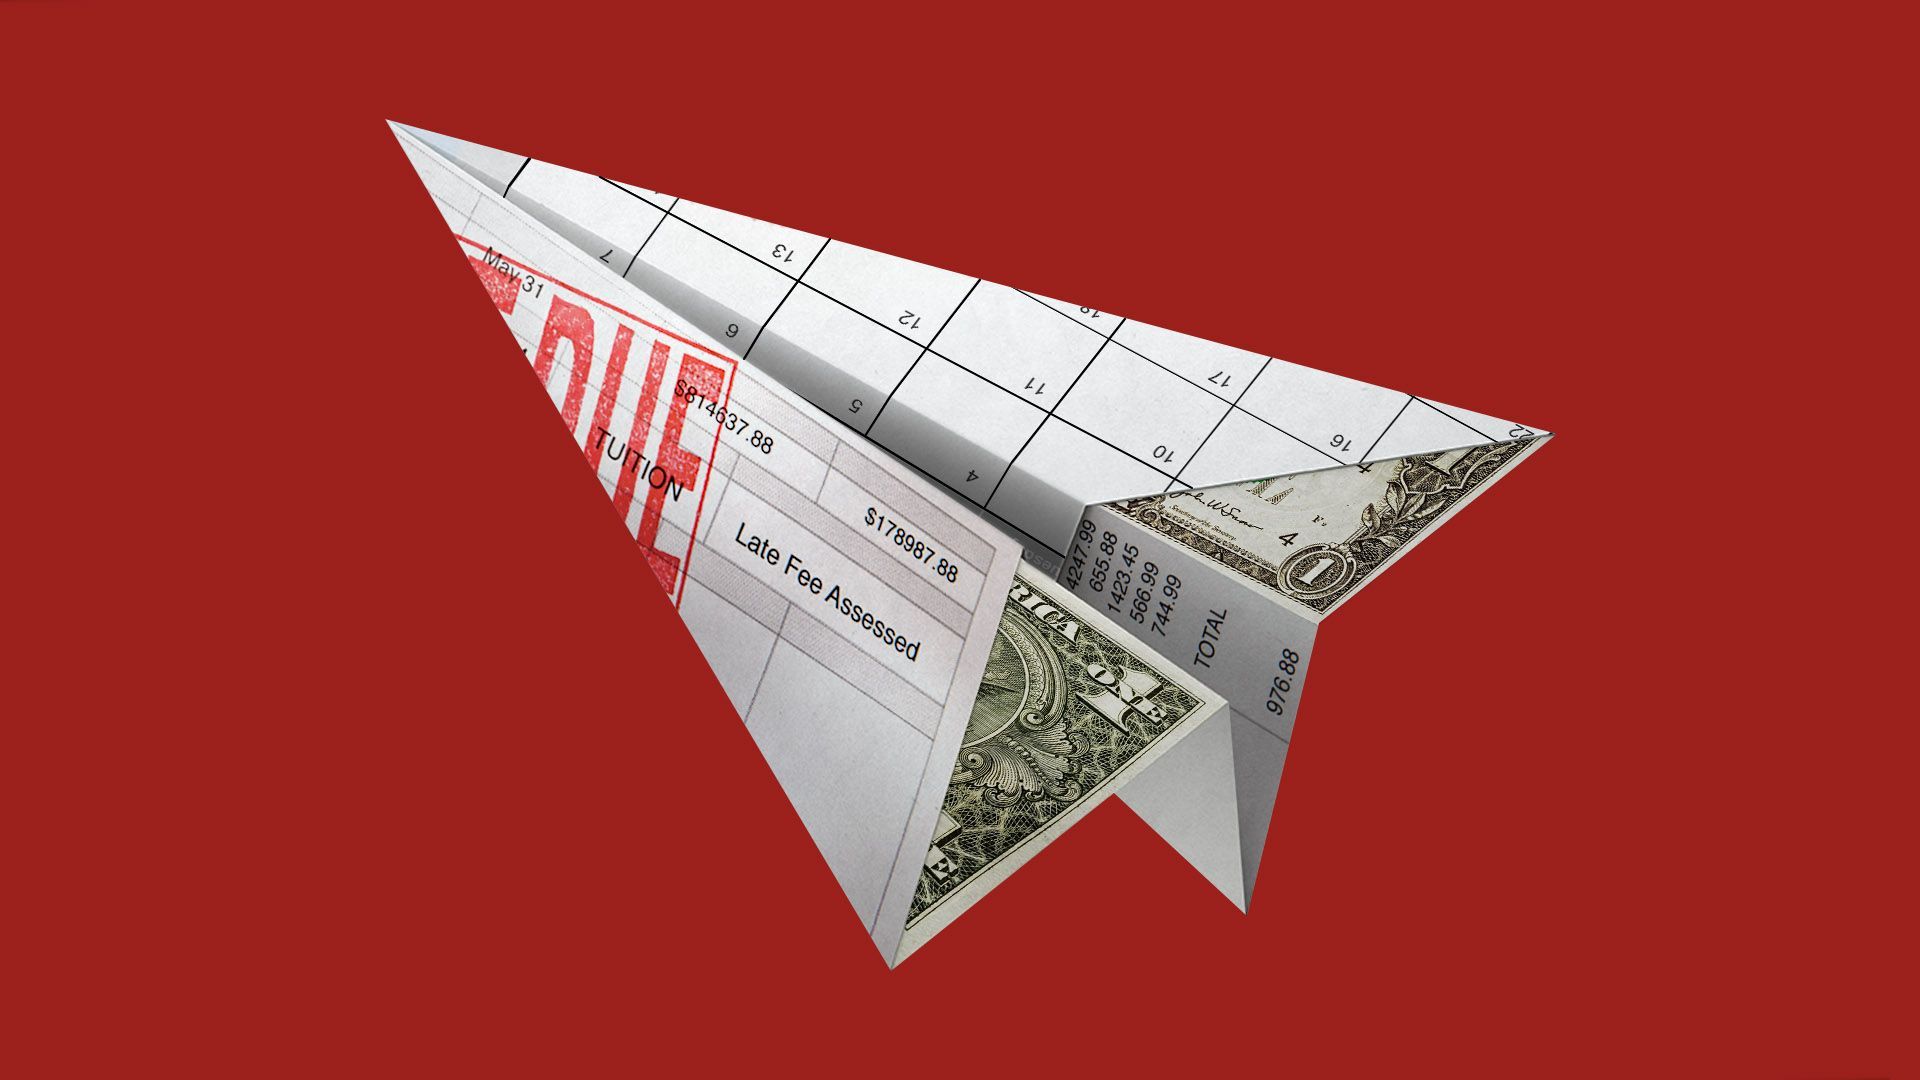 Illustration of a paper airplane made of a student loan bill, dollars and a page from a calendar